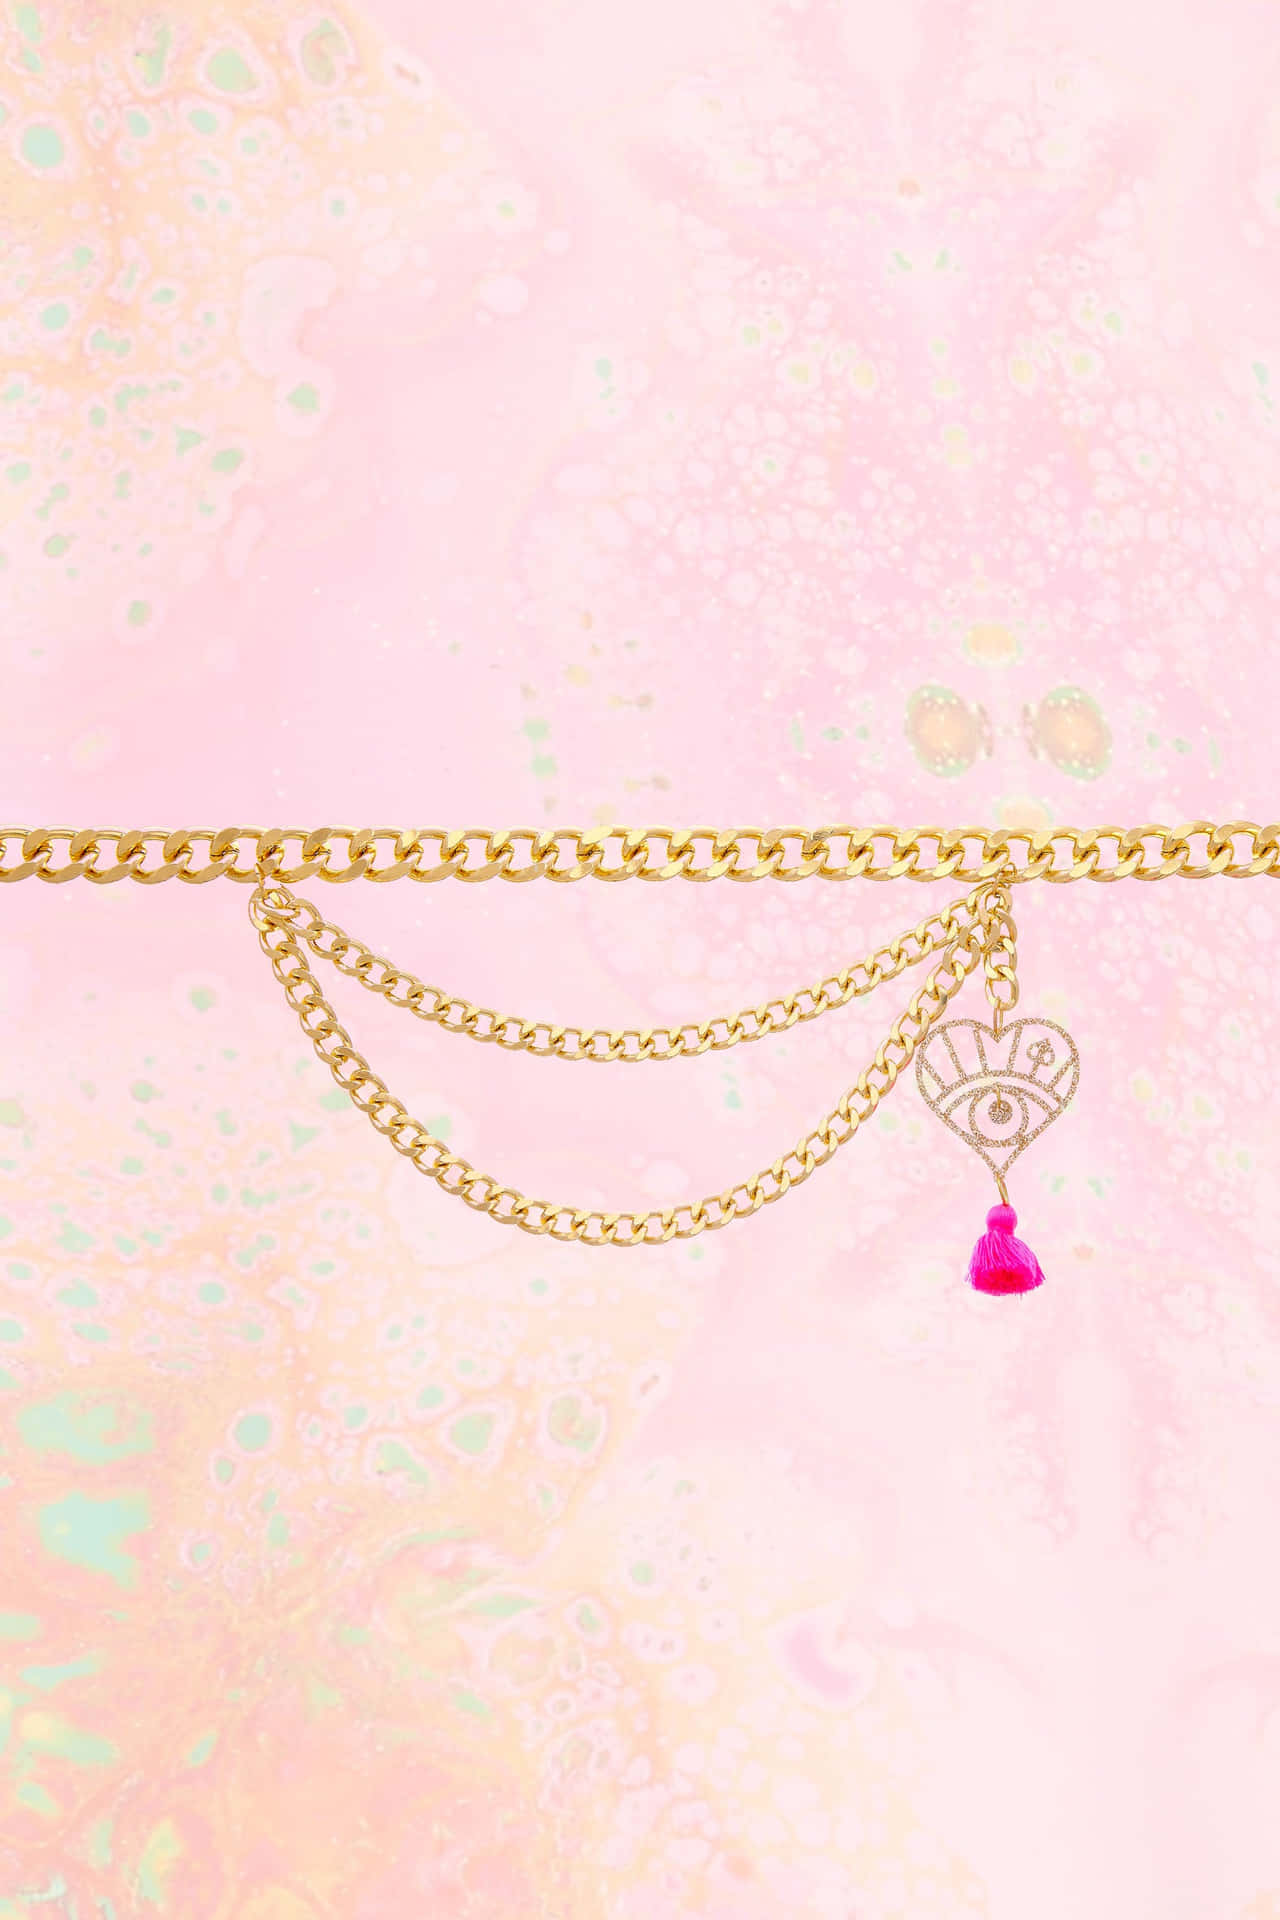 A Pink Chain Bracelet With A Pink Charm Wallpaper